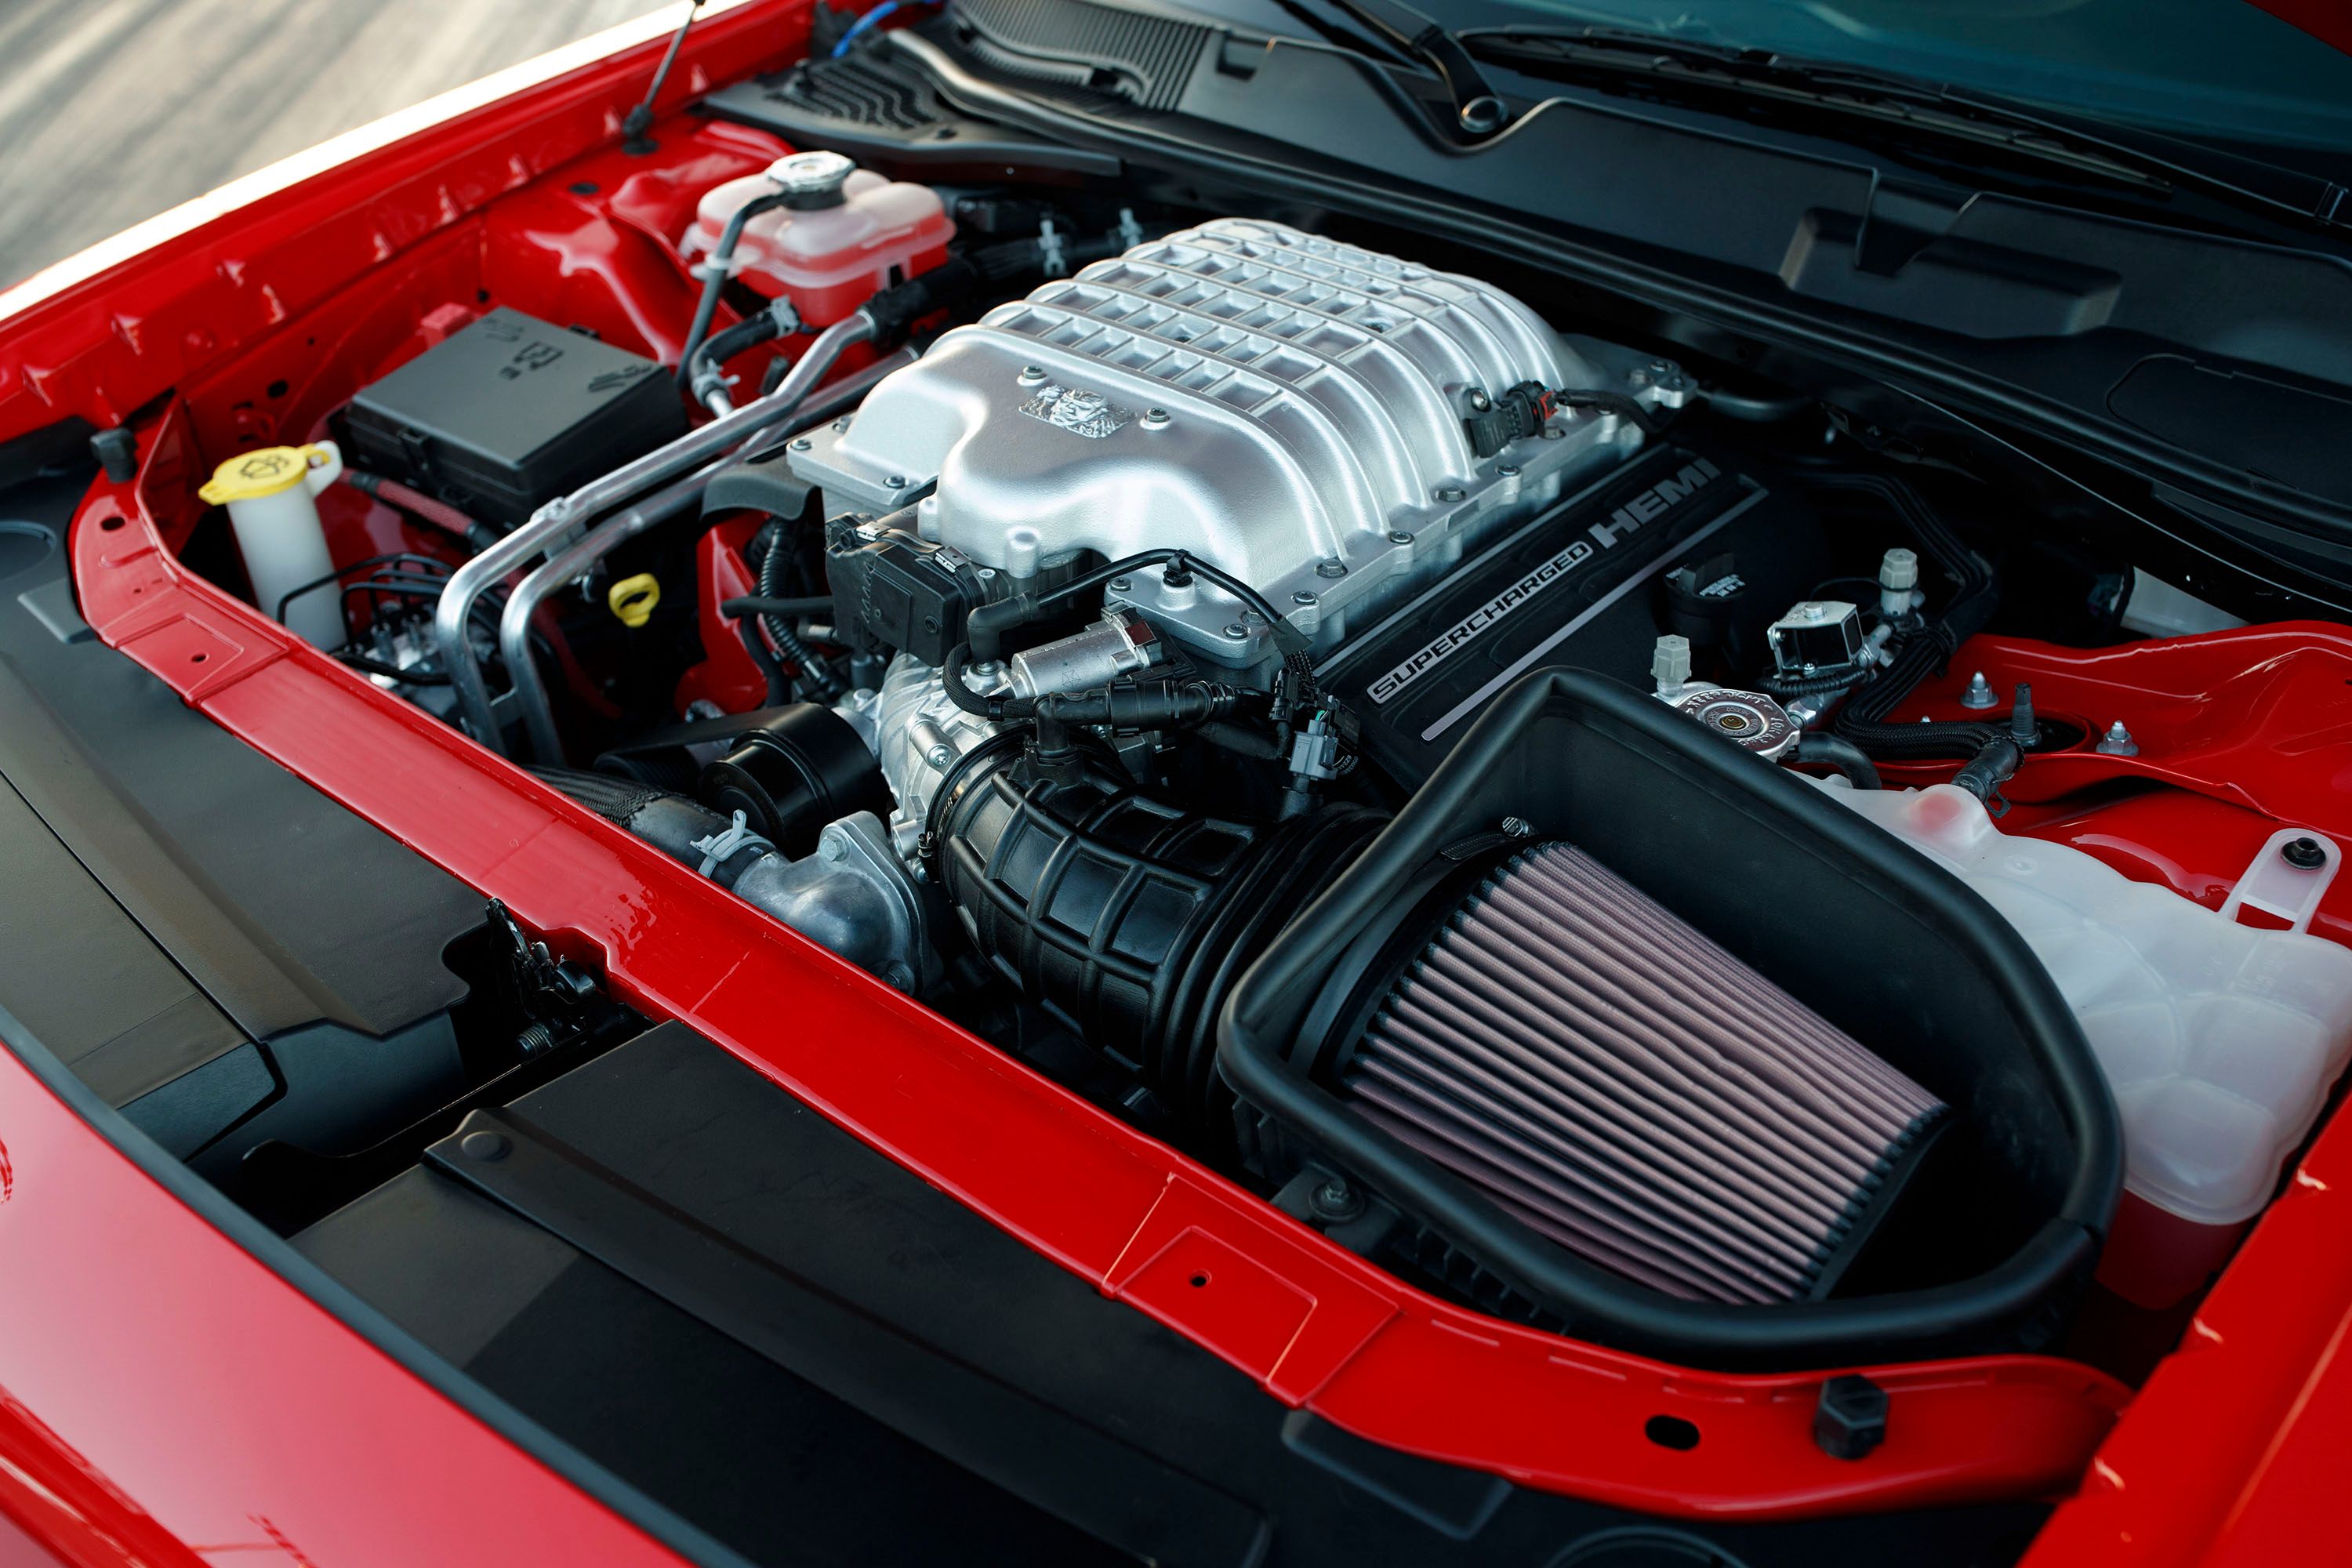 2021 Dodge Prepares The World For The Death of Supercharged V-8 Performance